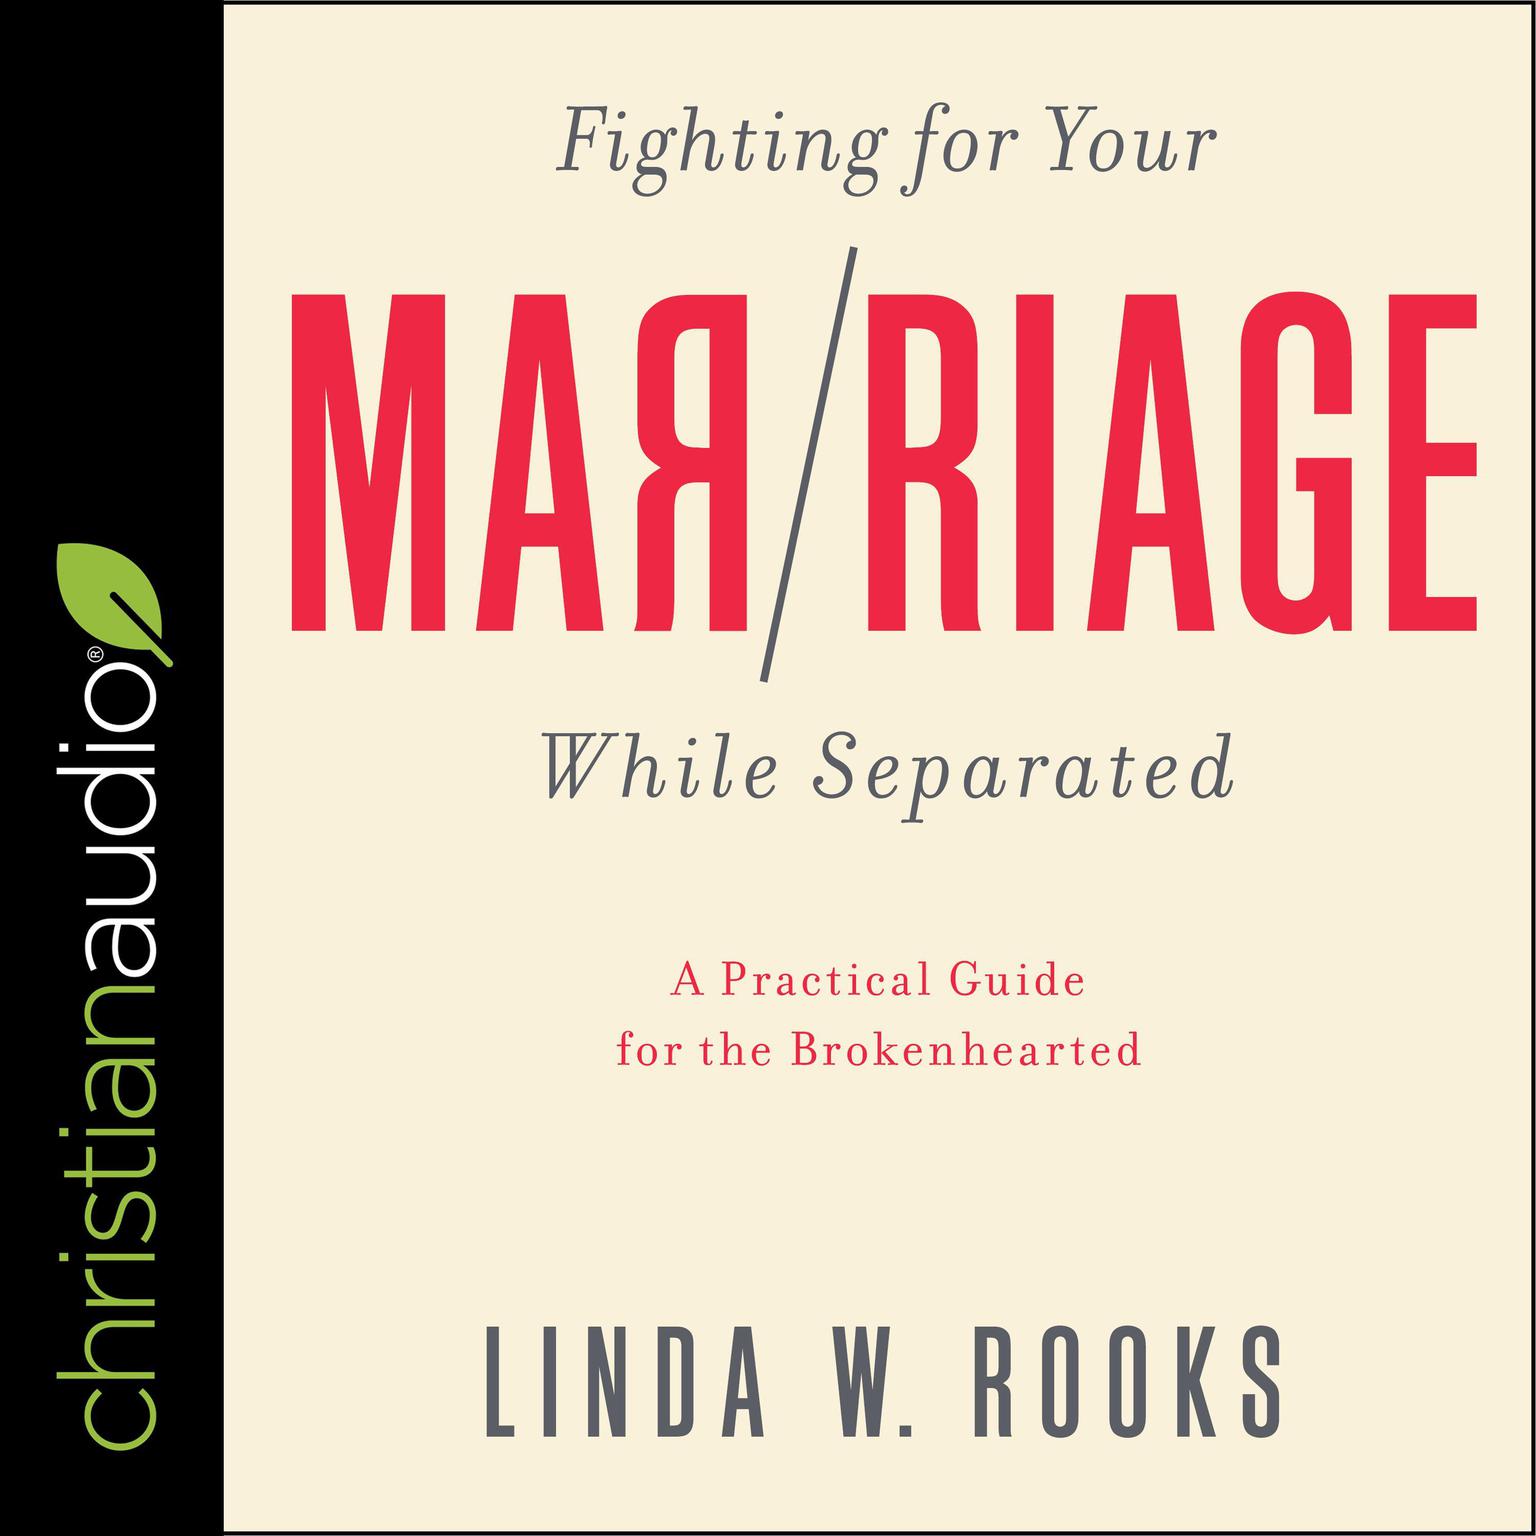 Fighting for Your Marriage While Separated: A Practical Guide For The Brokenhearted Audiobook, by Linda W. Rooks